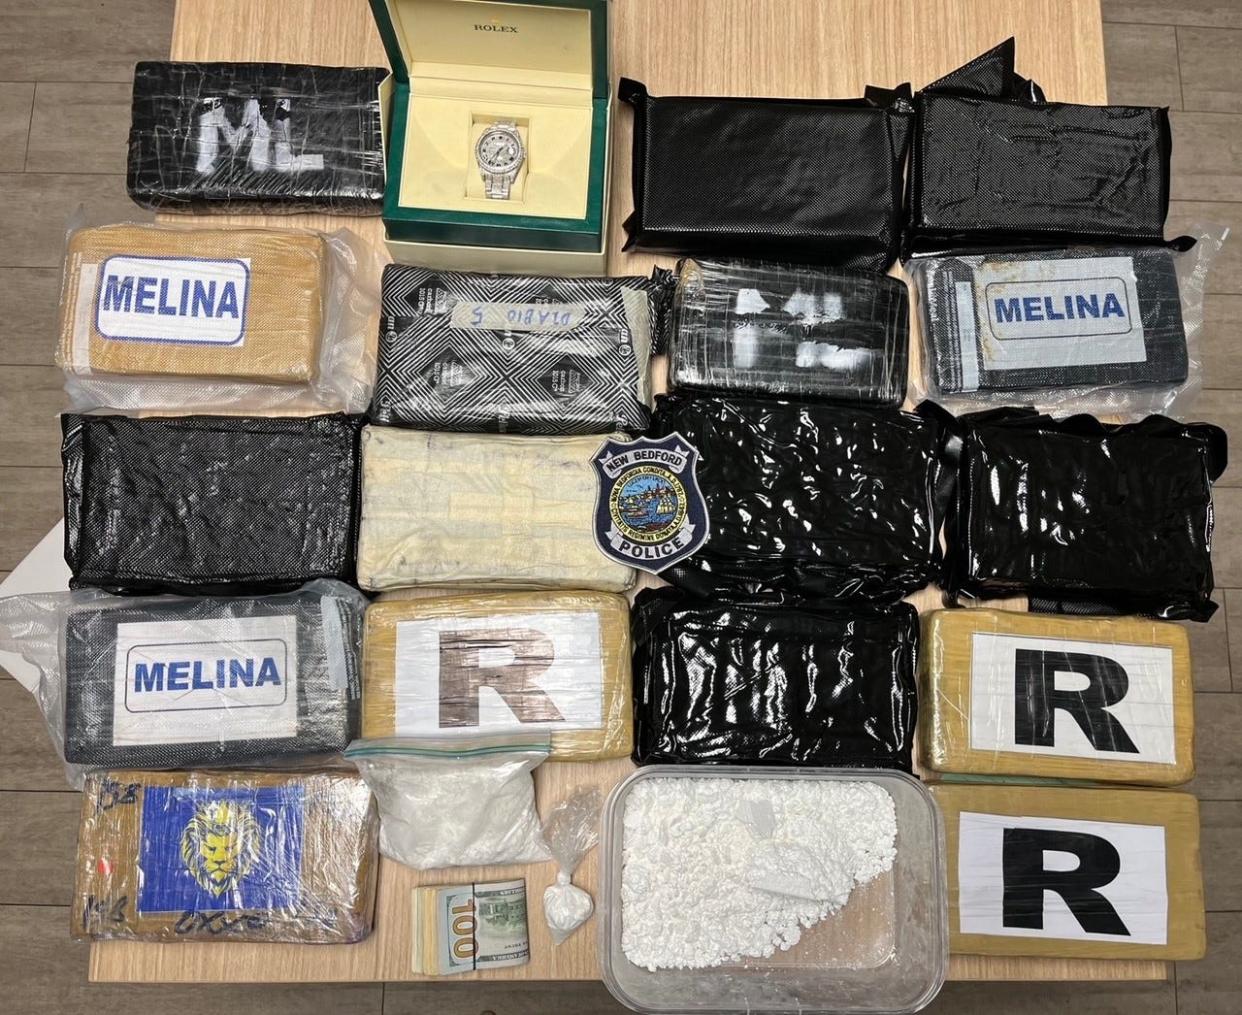 A New Bedford detective's investigation into a cocaine delivery service has led to a historic cocaine seizure - more than 37 pounds - that's worth an estimated $1 million.